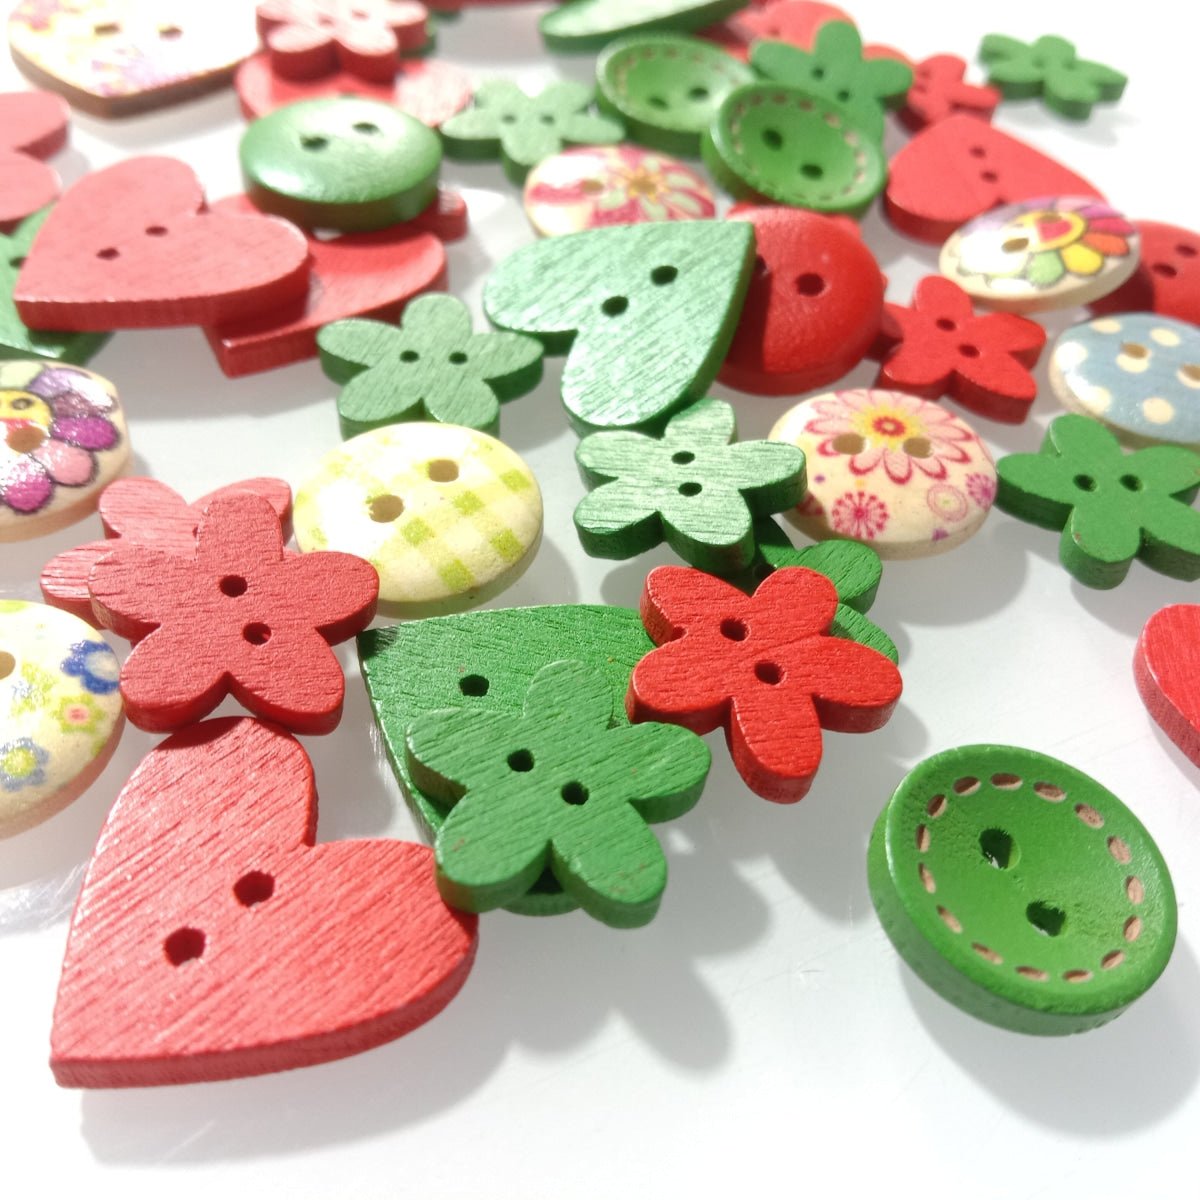 50pcs 10-20mm Colourful Red Green Flower Heart Wooden Buttons Christmas Theme 2 Hole Sewing Scrapbooking Craft DIY - Asia Sell